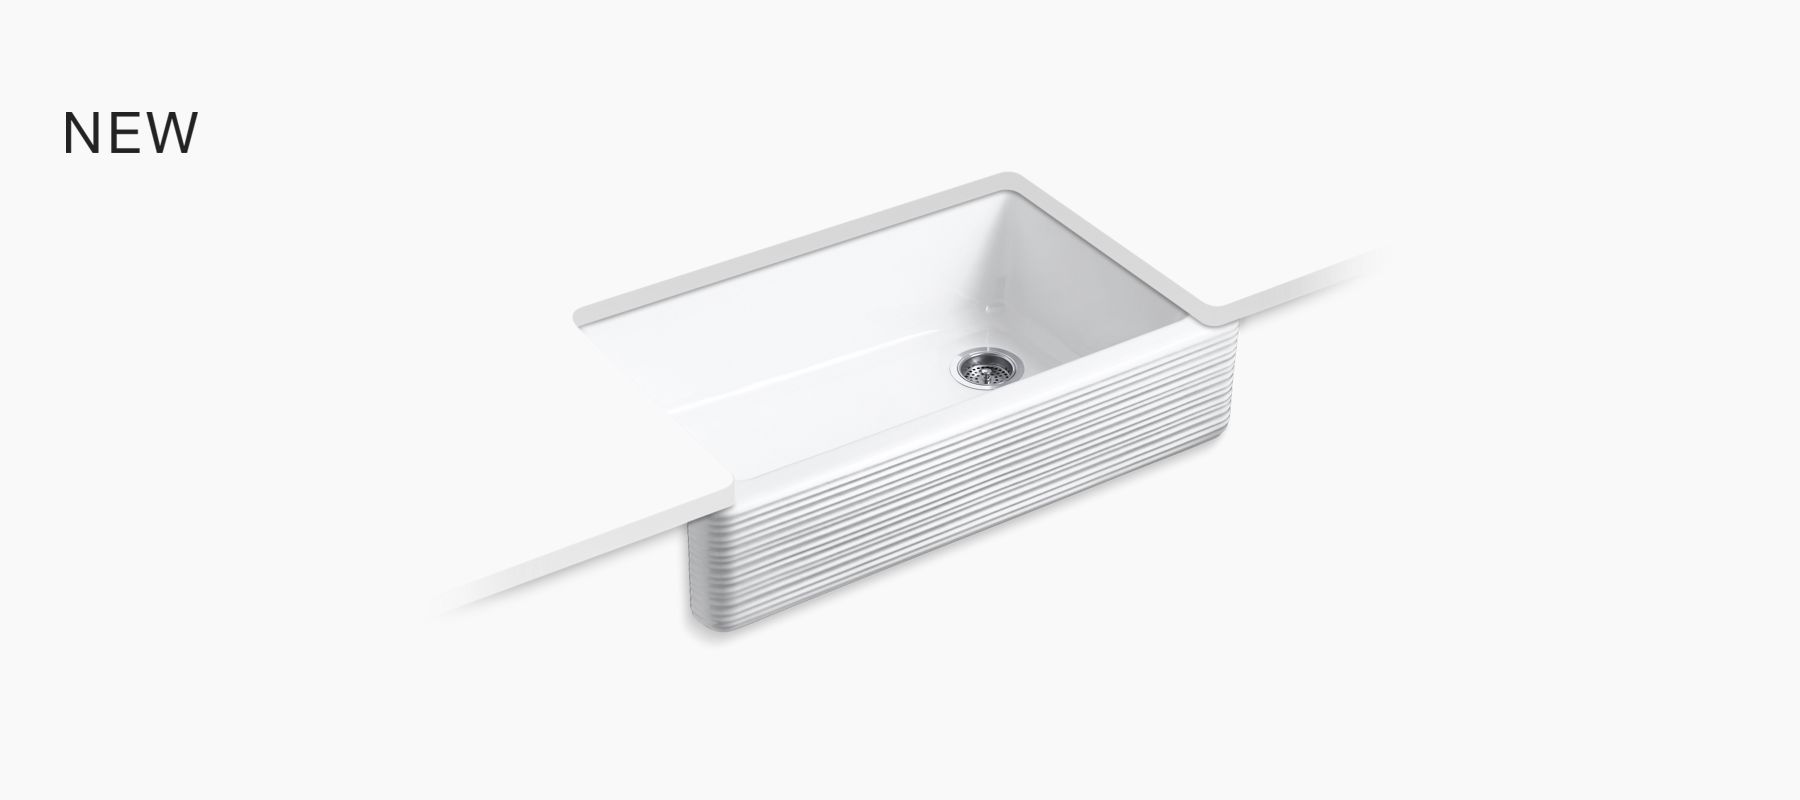 K 5914 4 Trieste Top Mount Kitchen Sink With Four Faucet